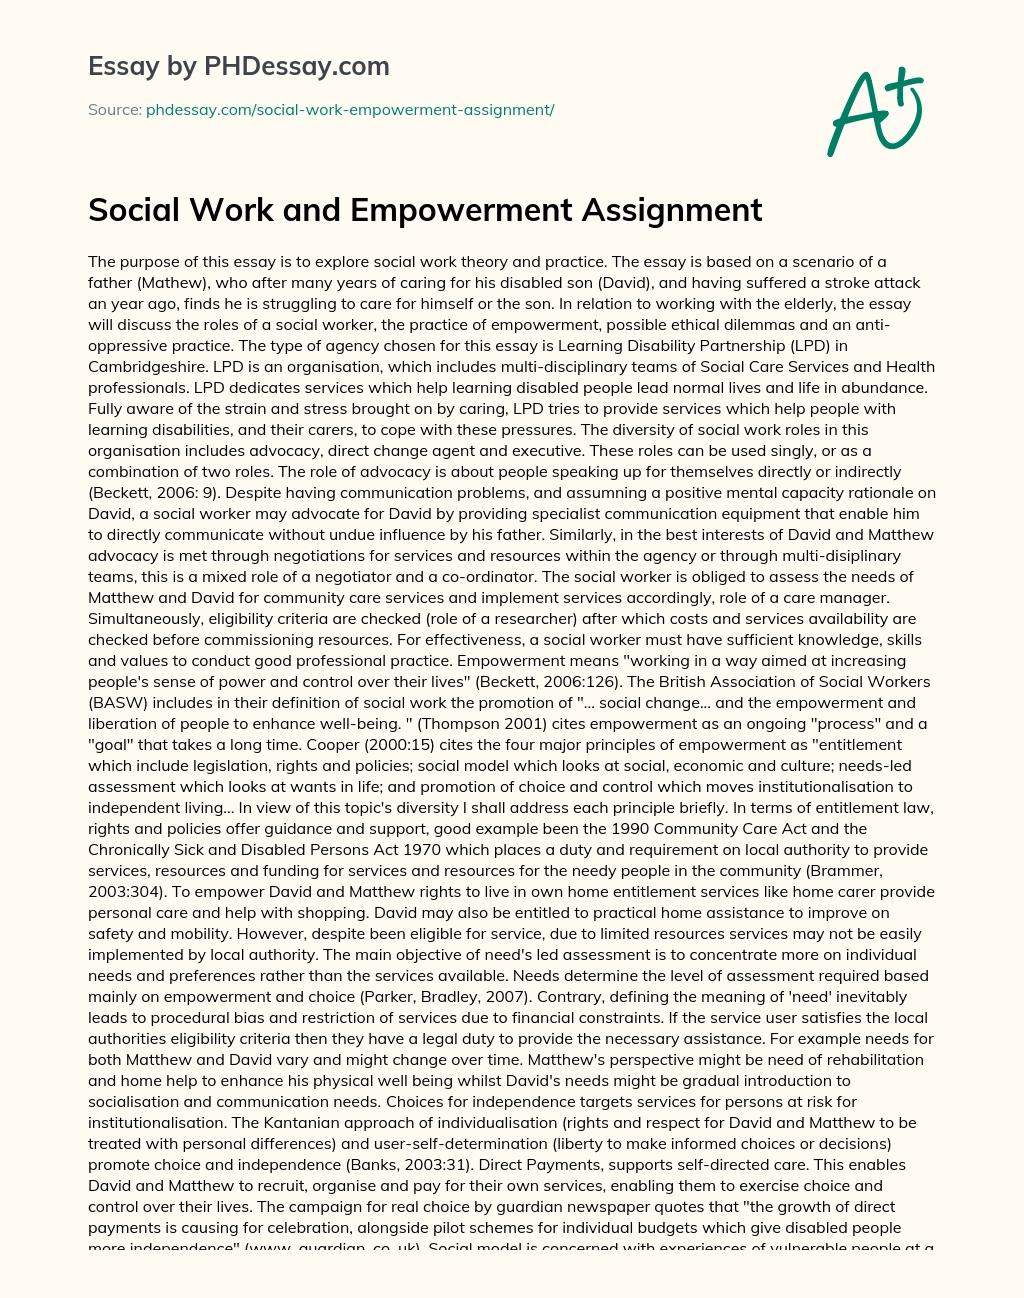 Social Work and Empowerment Assignment essay